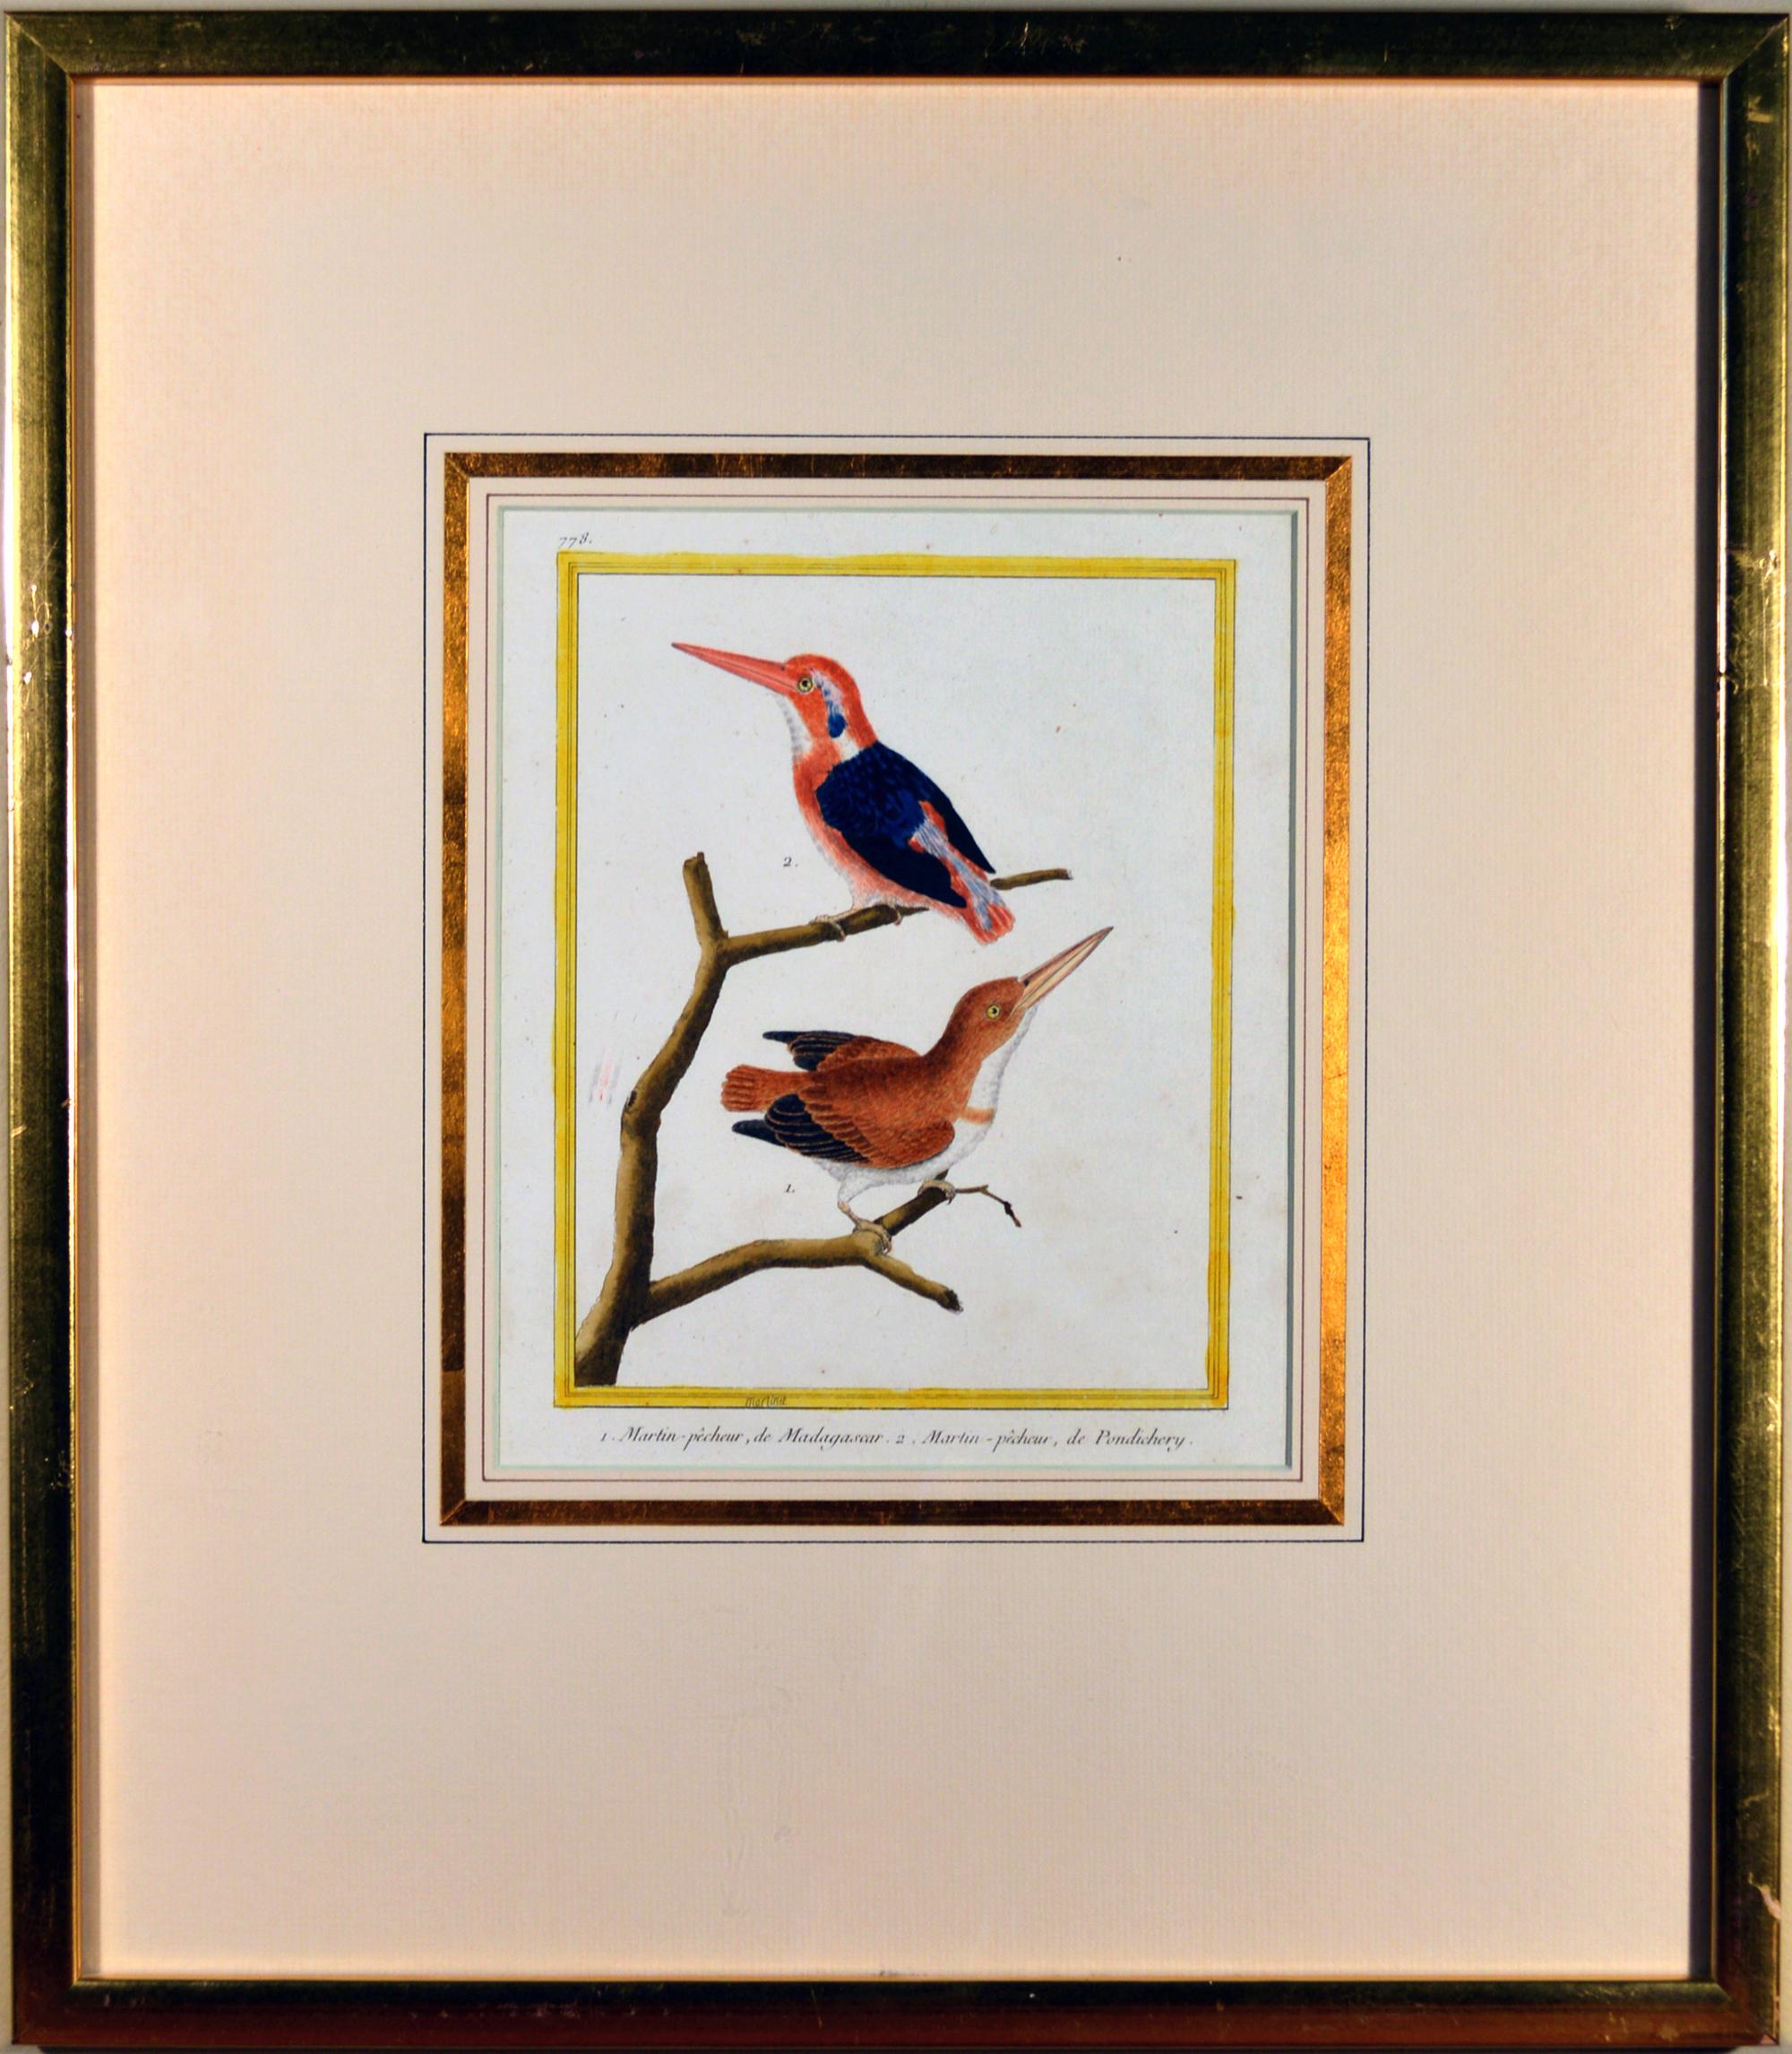 Francois Nicholas Martinet bird engraving,
circa 1770.

The framed Francois Martinet engraving is from Buffon's Historie Naturelle des Oiseaux displaed beautifully in a large frame.

Dimensions: 21 3/4 inches high x 13 inches wide x 3/4 inches